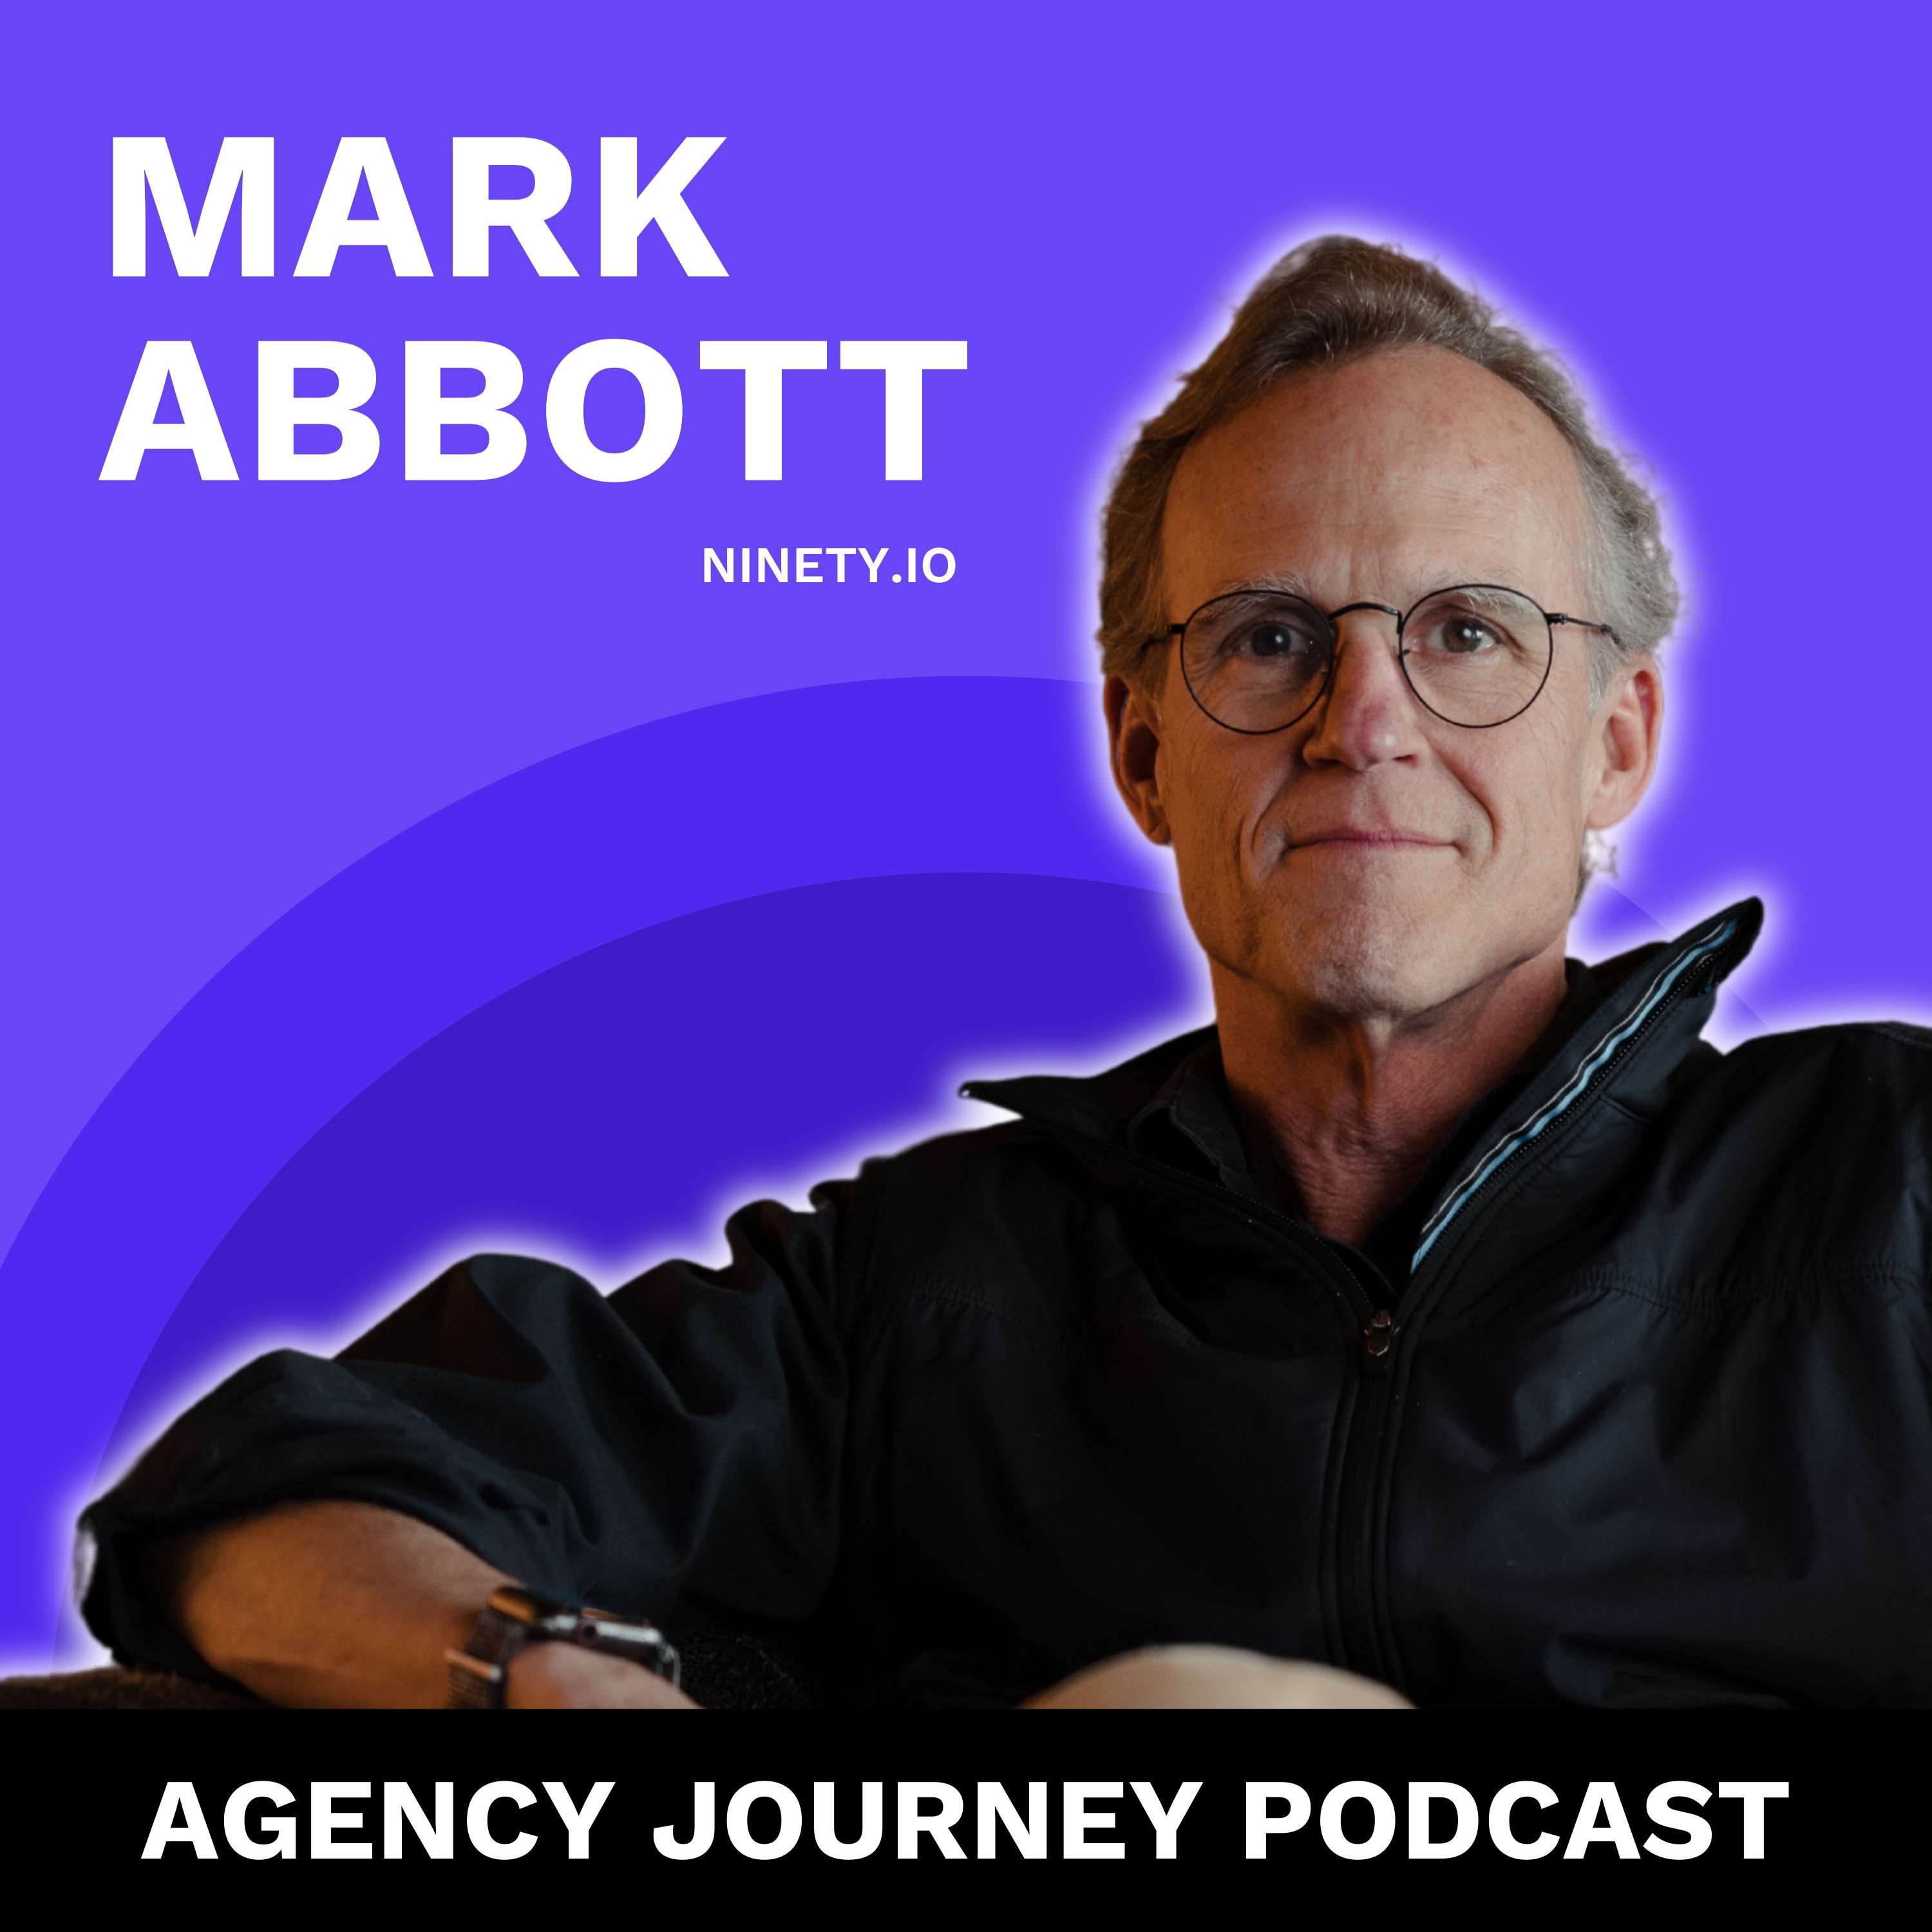 How to Build a Resilient and Empowered Company Culture with Mark Abbott